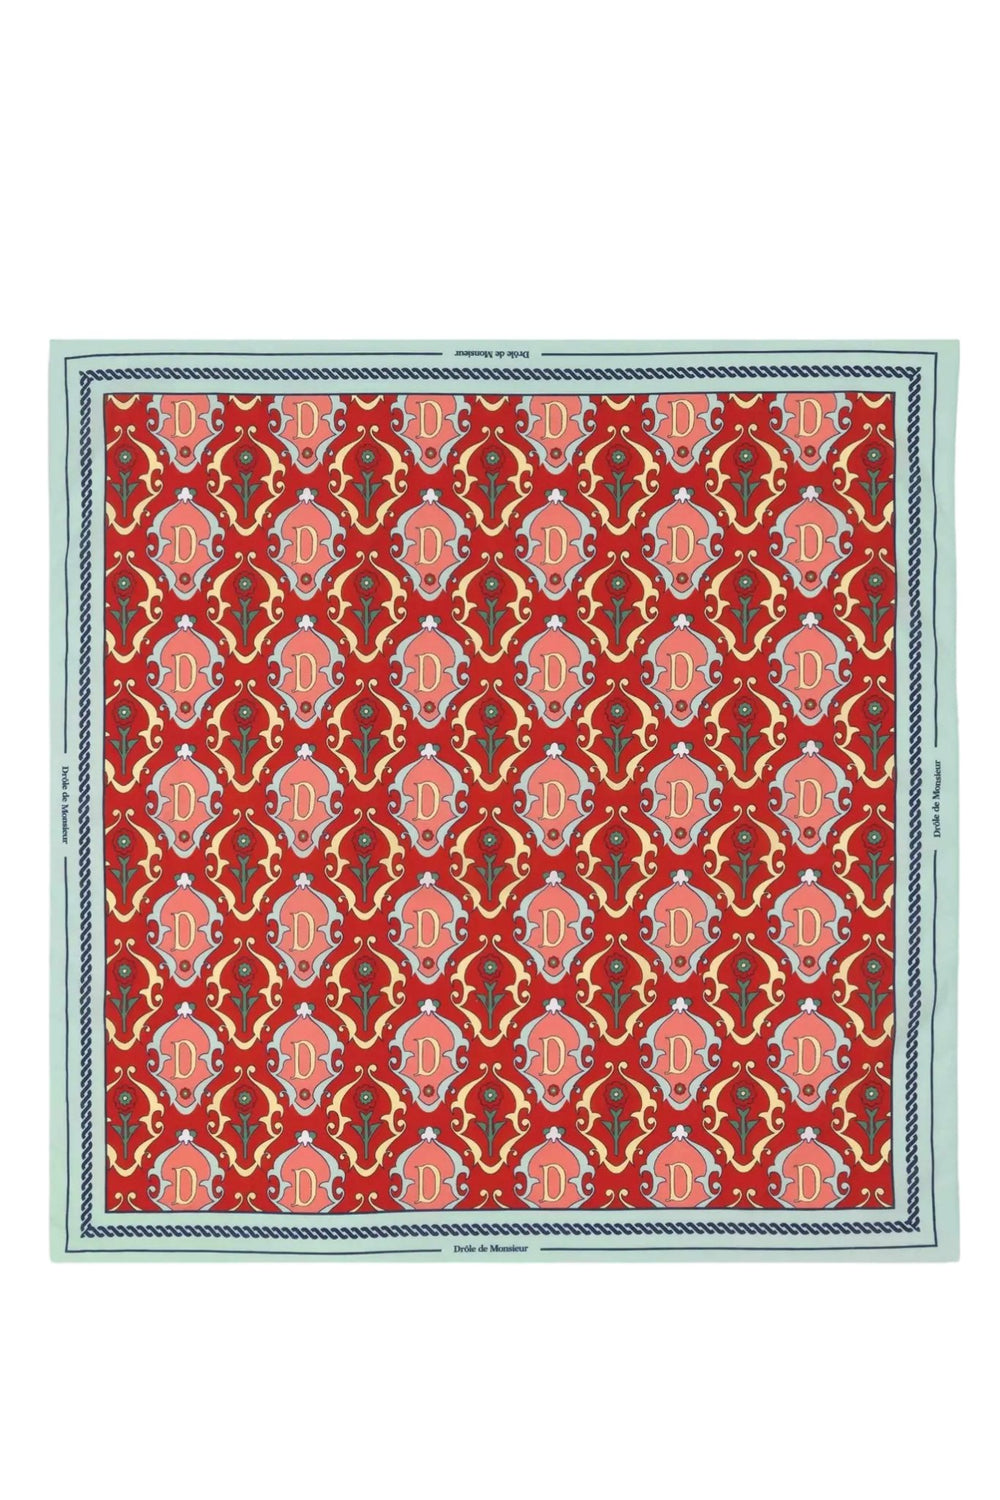 Red DROLE DE MONSIEUR ornamental rug with repeating patterns and a cotton scarf decorative border.